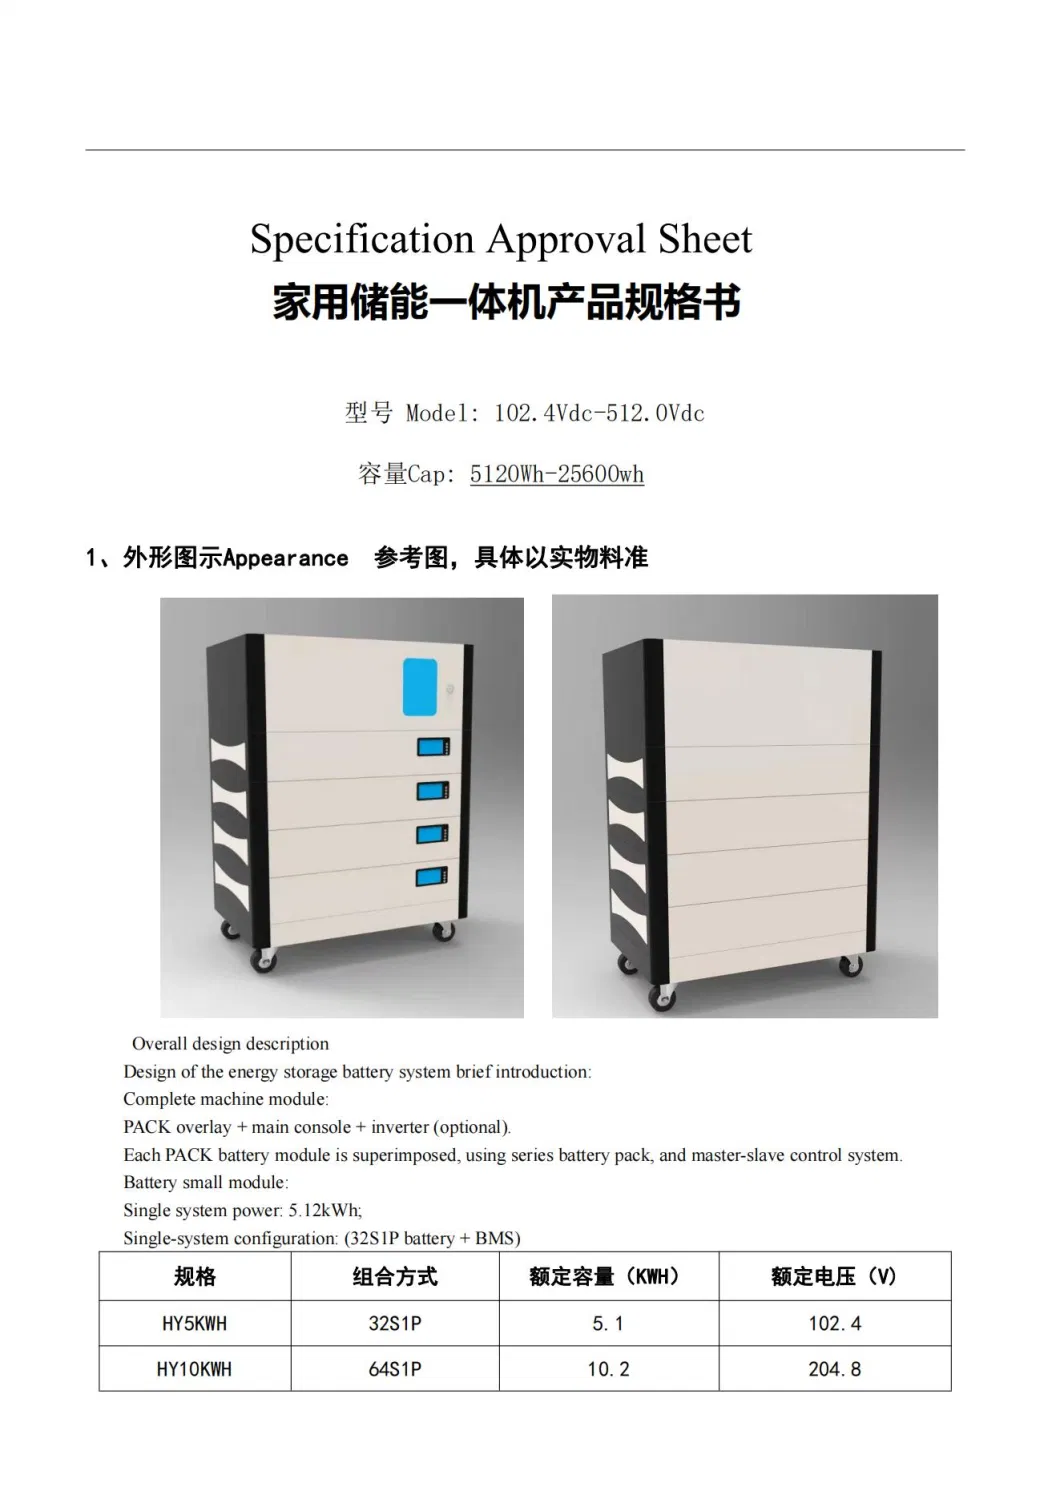 All-in-One 3kw/5kwh Series Products for Tesla Powerwall Home Energy Battery Solar Panel Storage